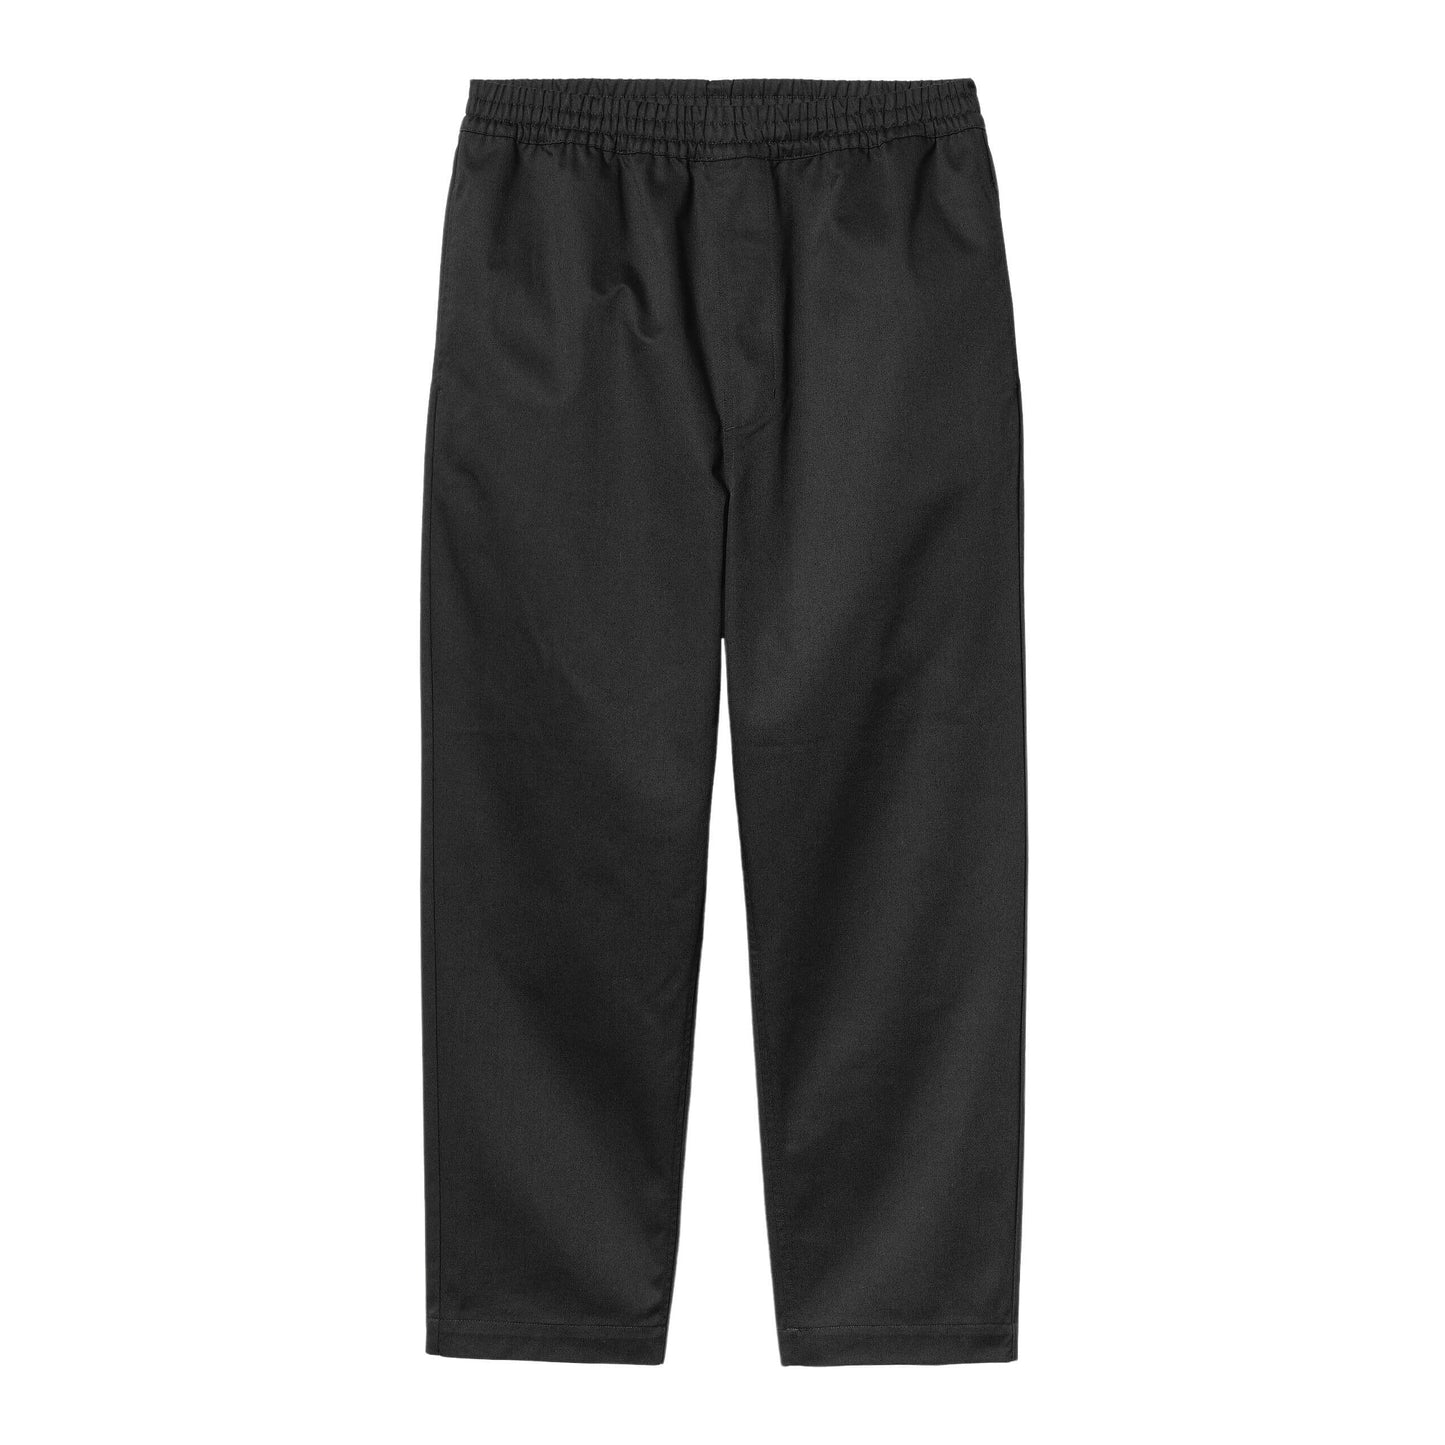 Carhartt WIP Newhaven Pant-black-rinsed_front